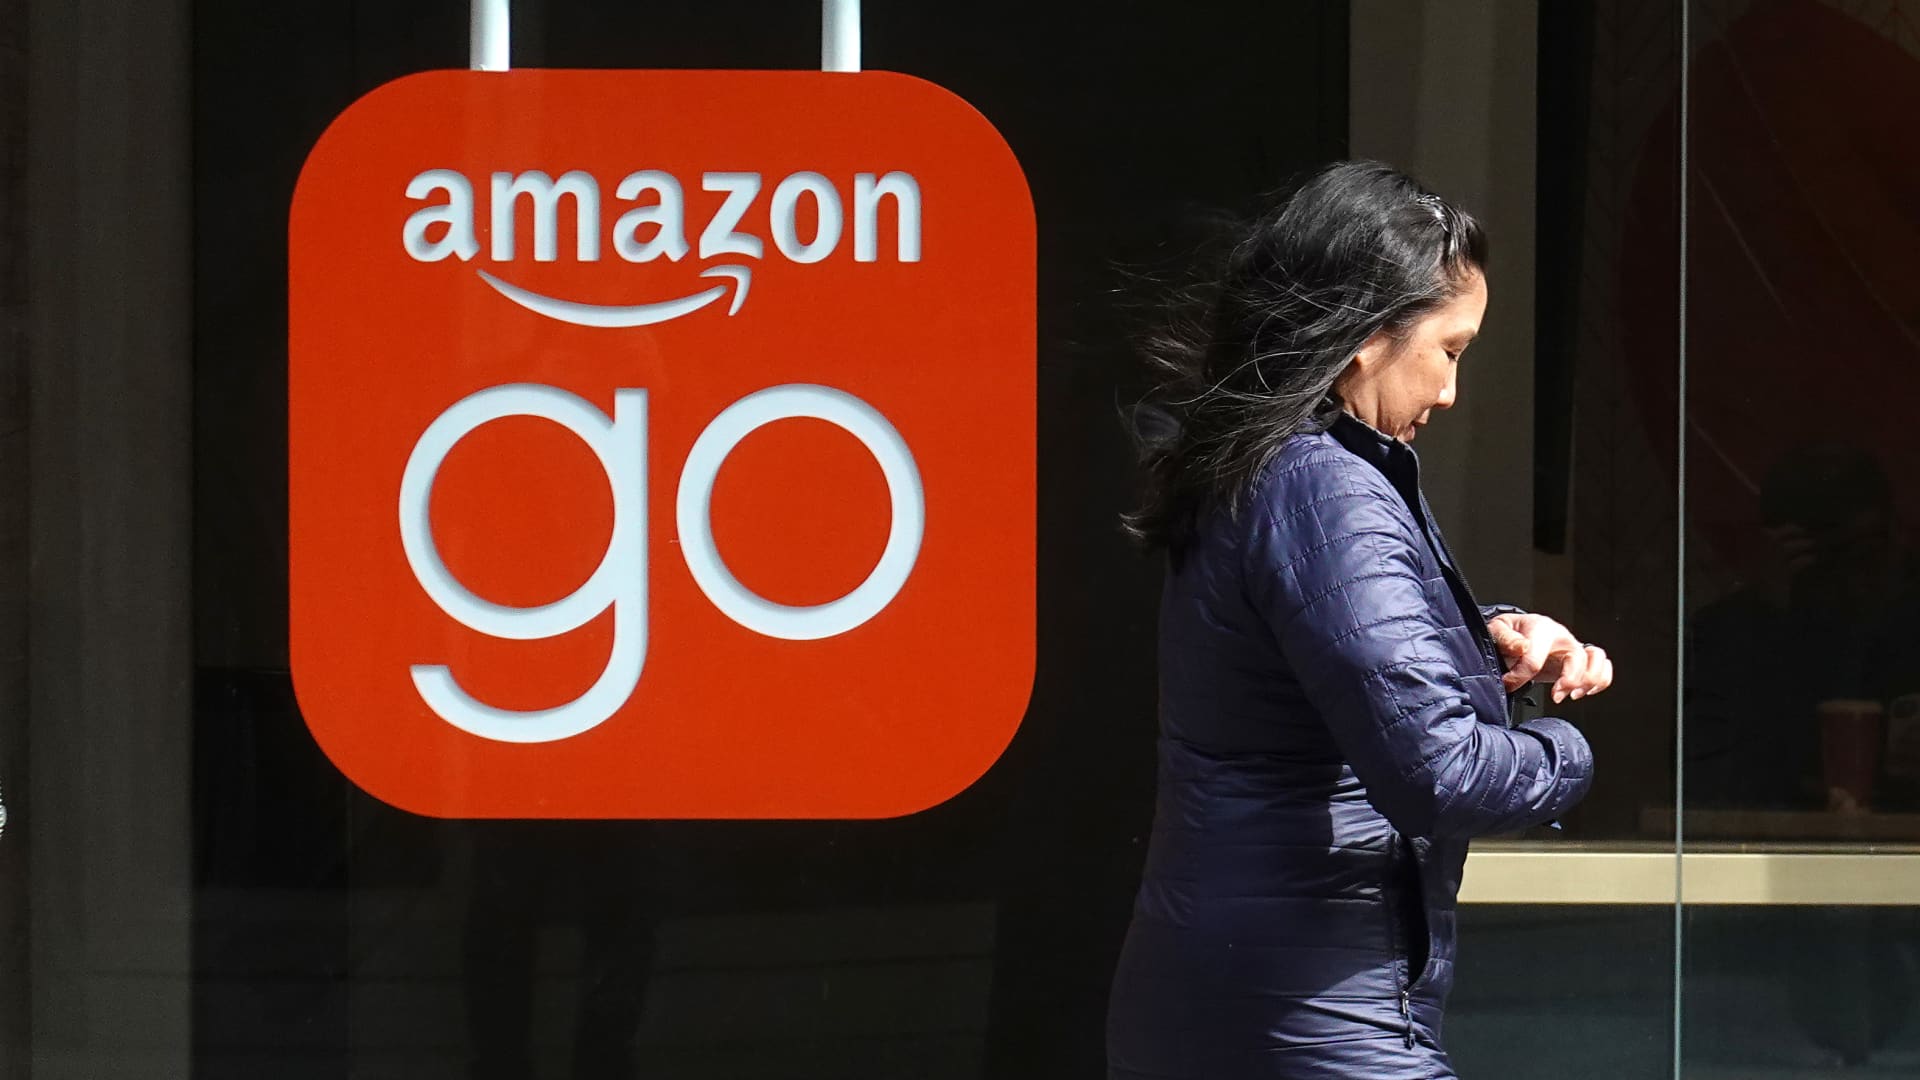 Goldman Sachs loves Uber, Meta and Amazon â€” and ranks them in order of preference